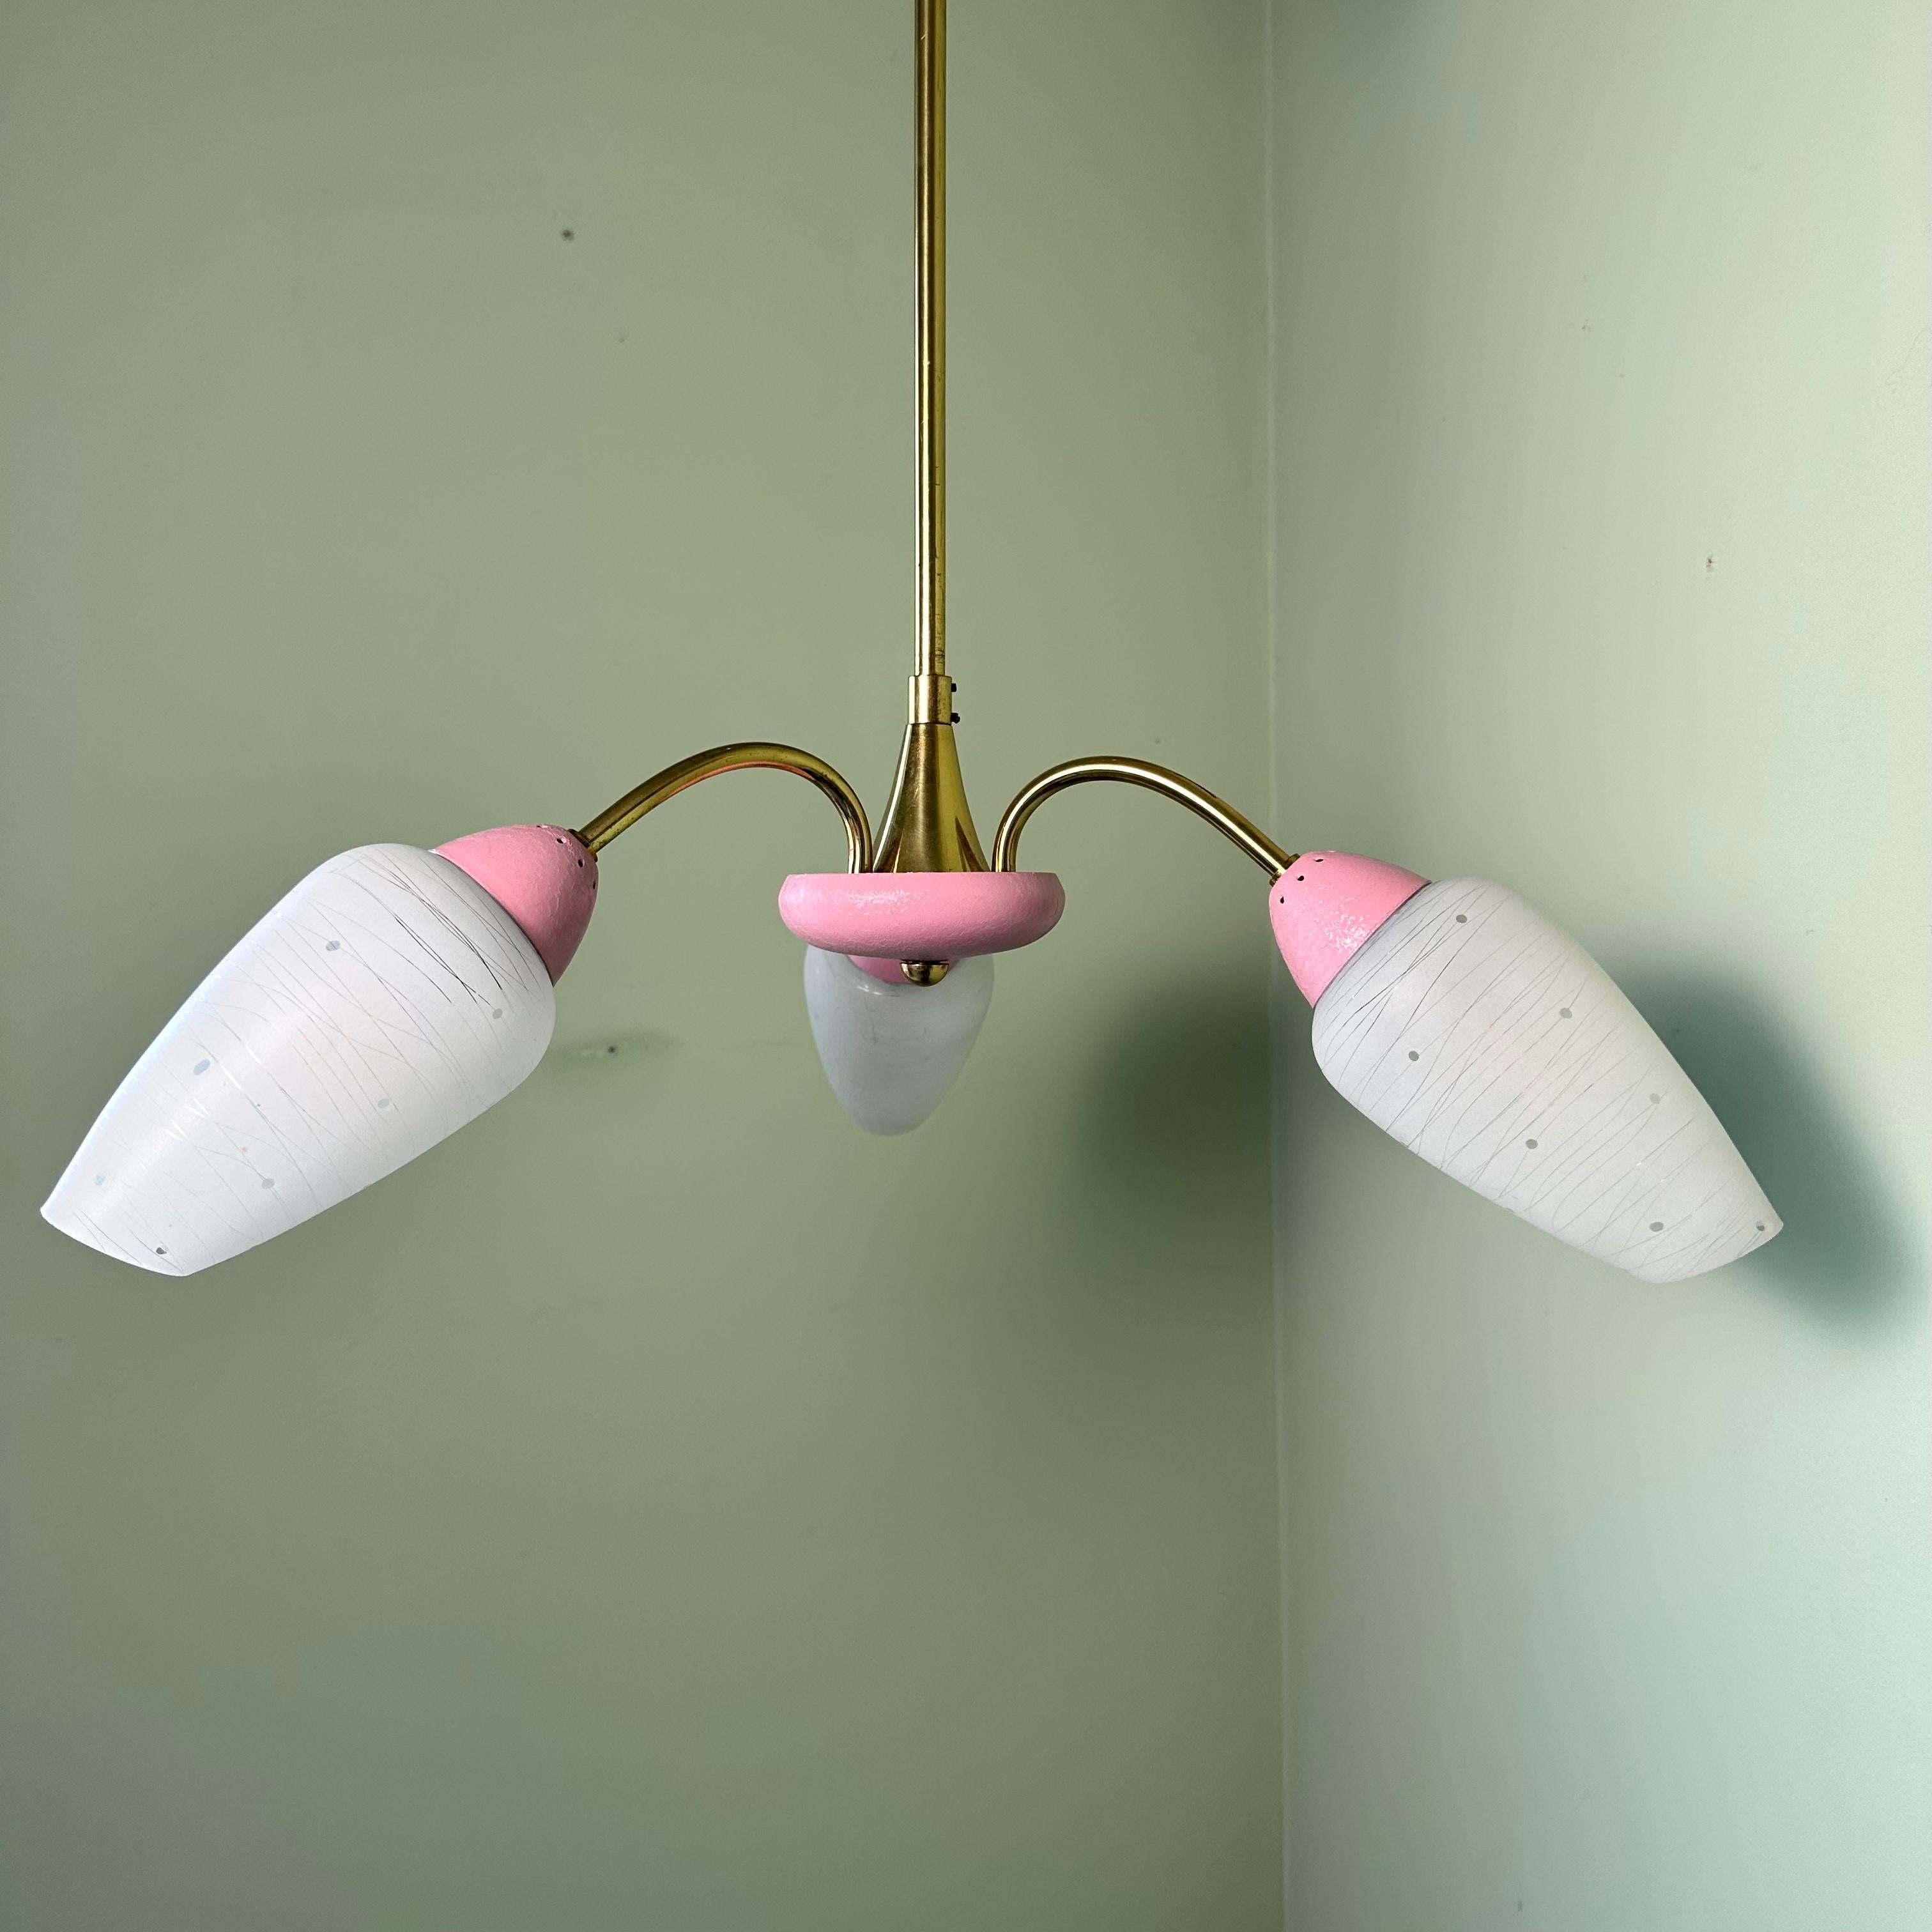 Vintage feminine and playful Italian style midcentury 3 arm Sputnik chandelier in Brass with bubblegum pink painted accents. The 3 curved brass arms create a downlight effect with cone shaped frosted glass diffuser shades. Etched into the frosting